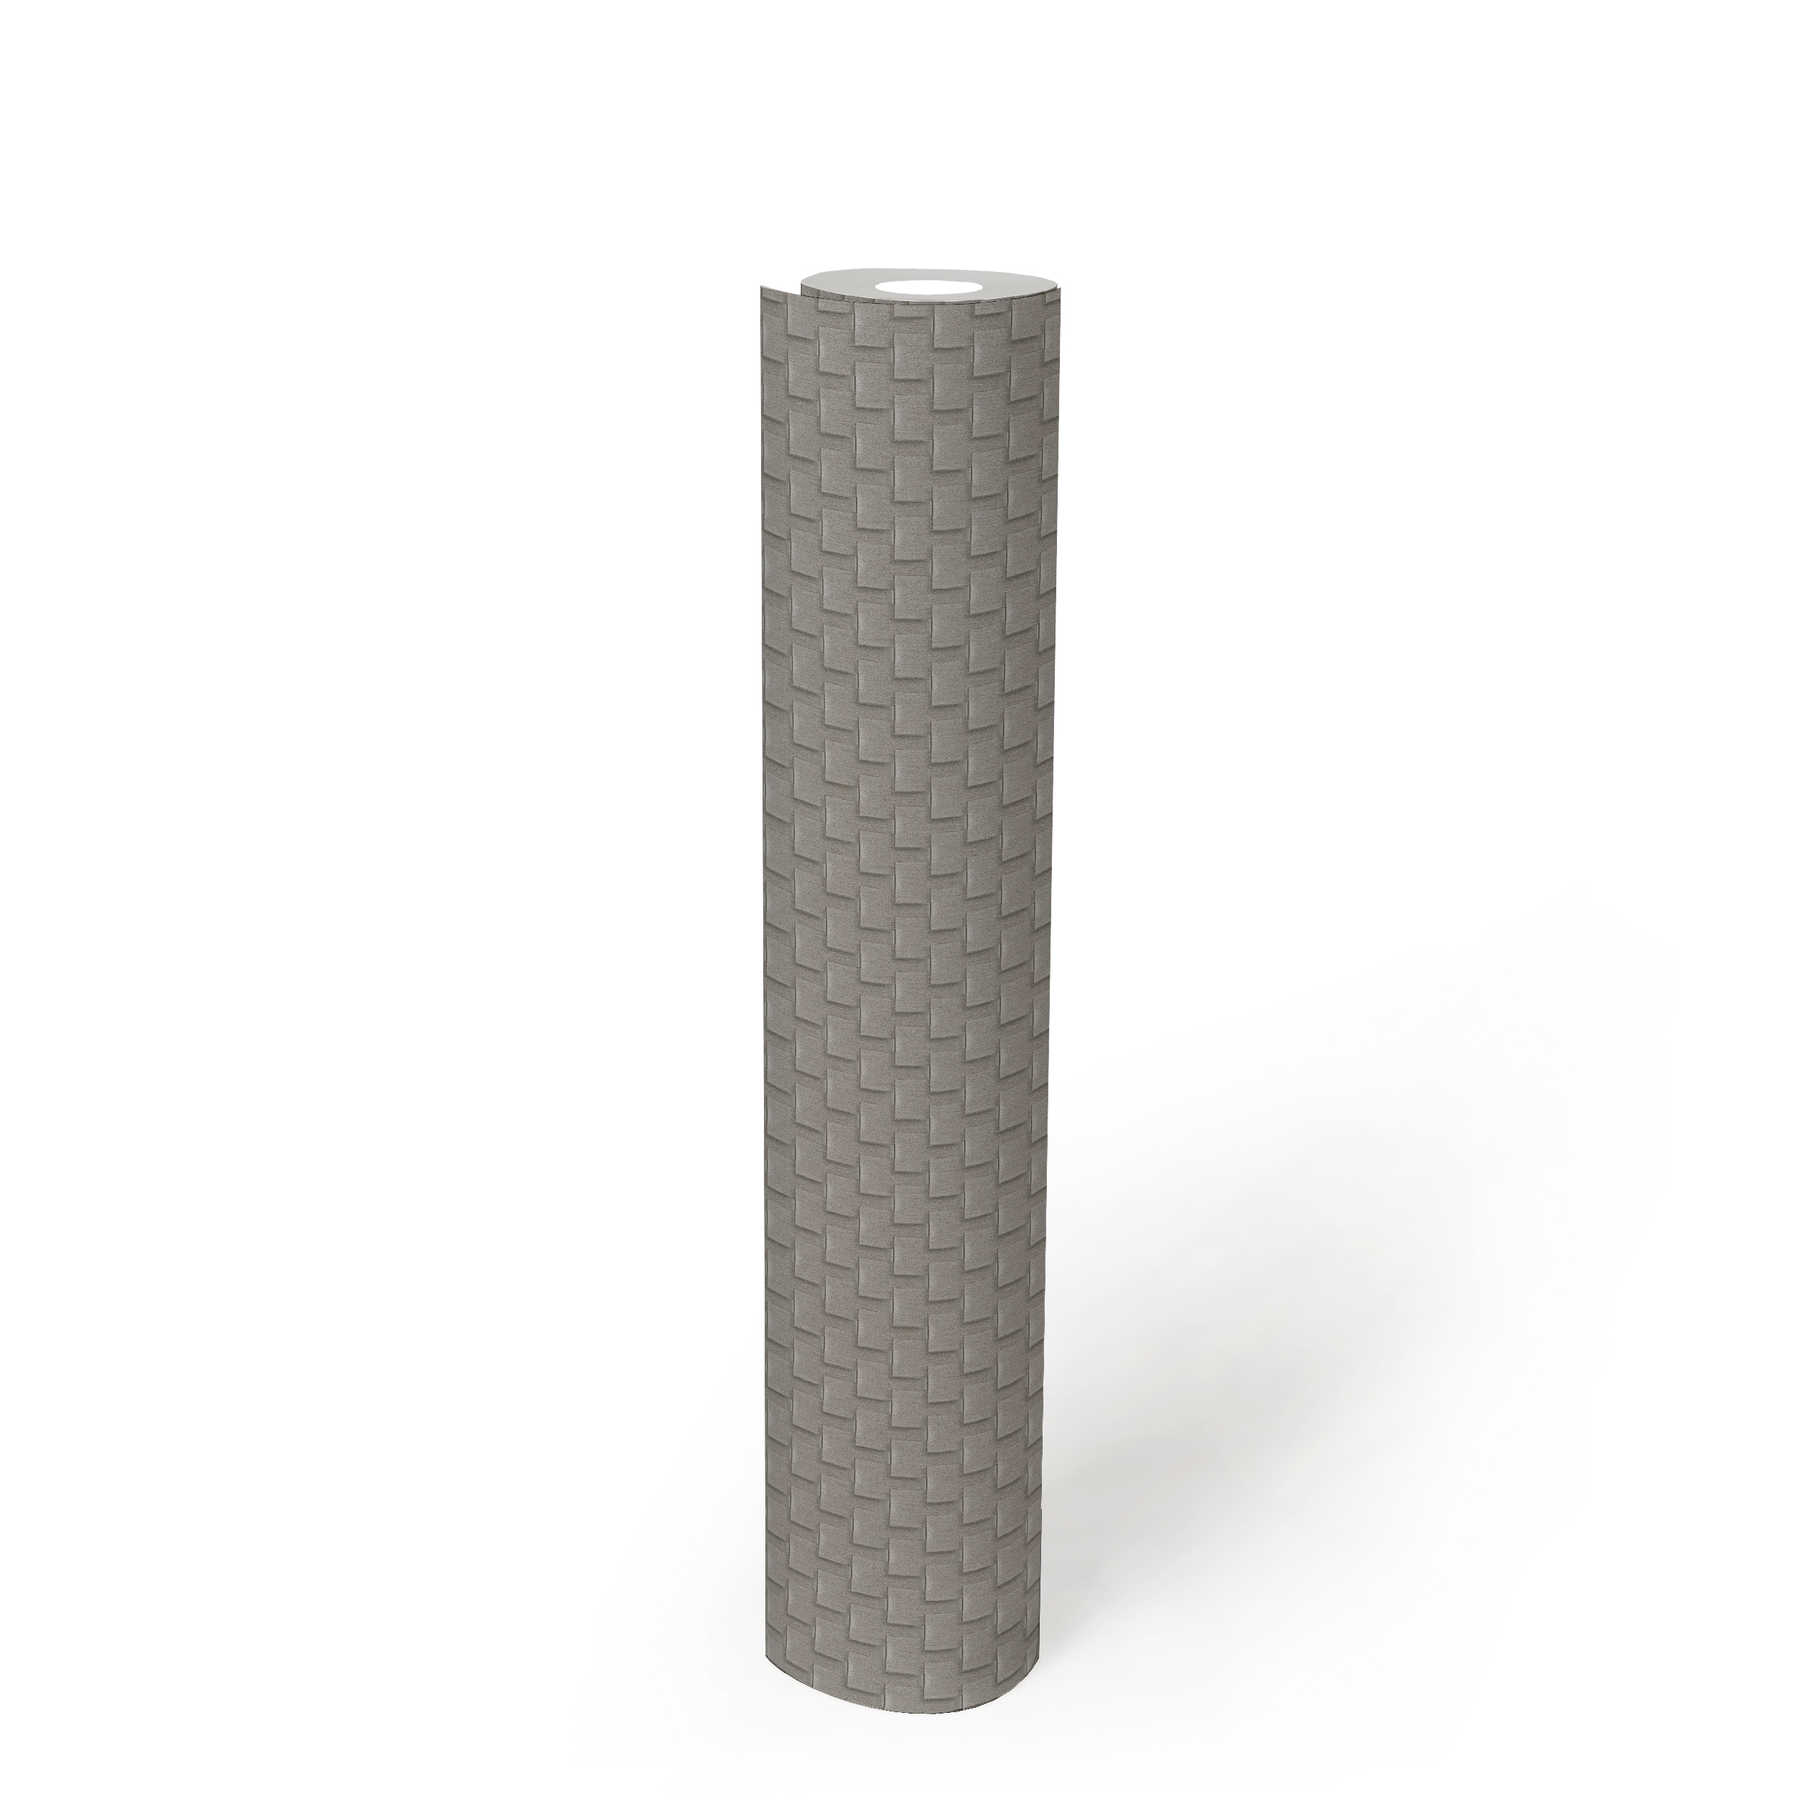             Patterned wallpaper with facet design and 3D effect - grey, silver
        